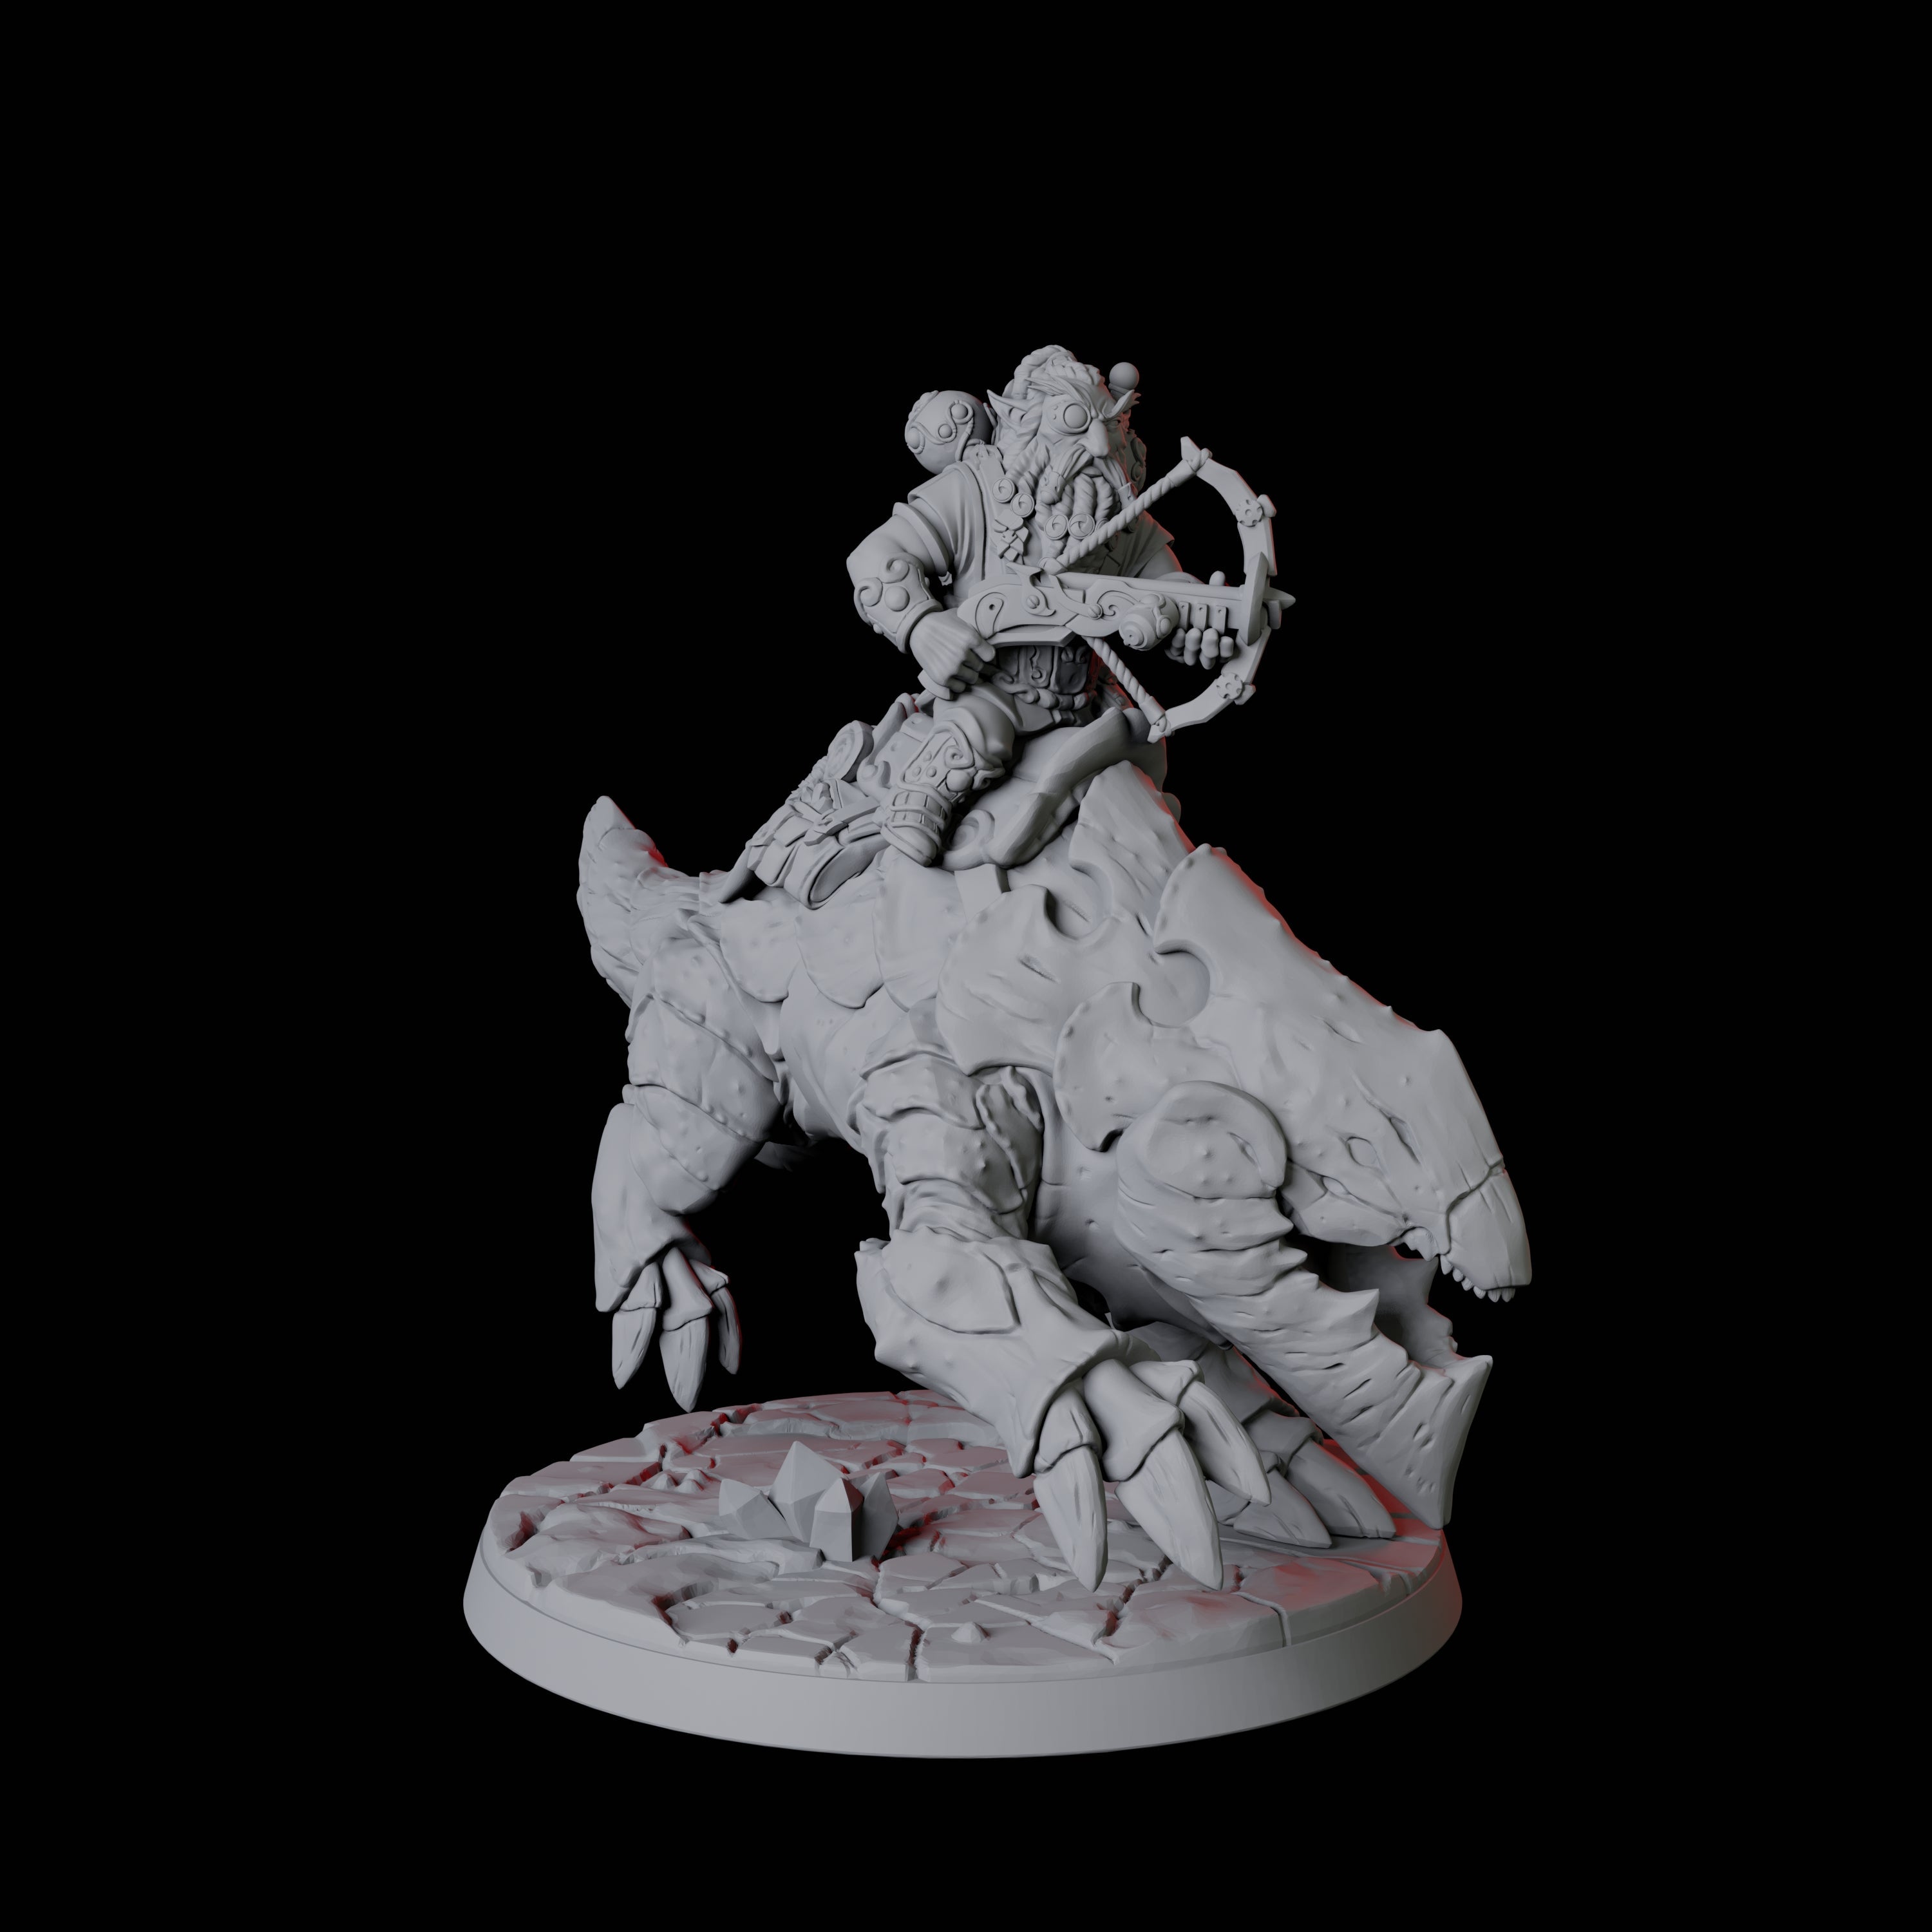 Gnome Rider B Miniature for Dungeons and Dragons, Pathfinder or other TTRPGs